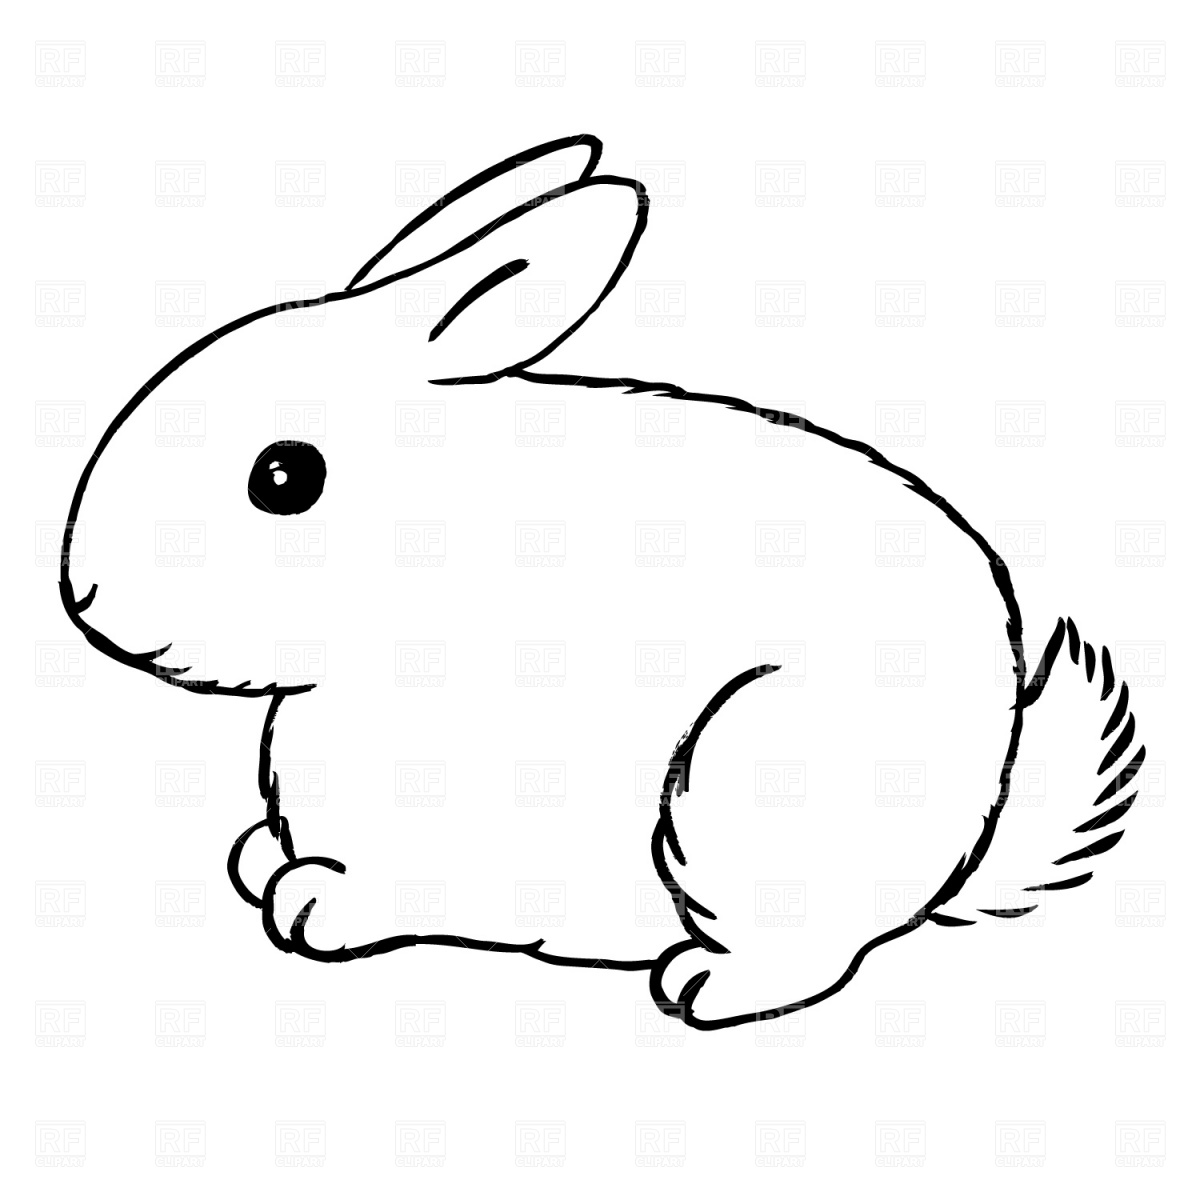 PICTURE OF BUNNY IN CLIP ART